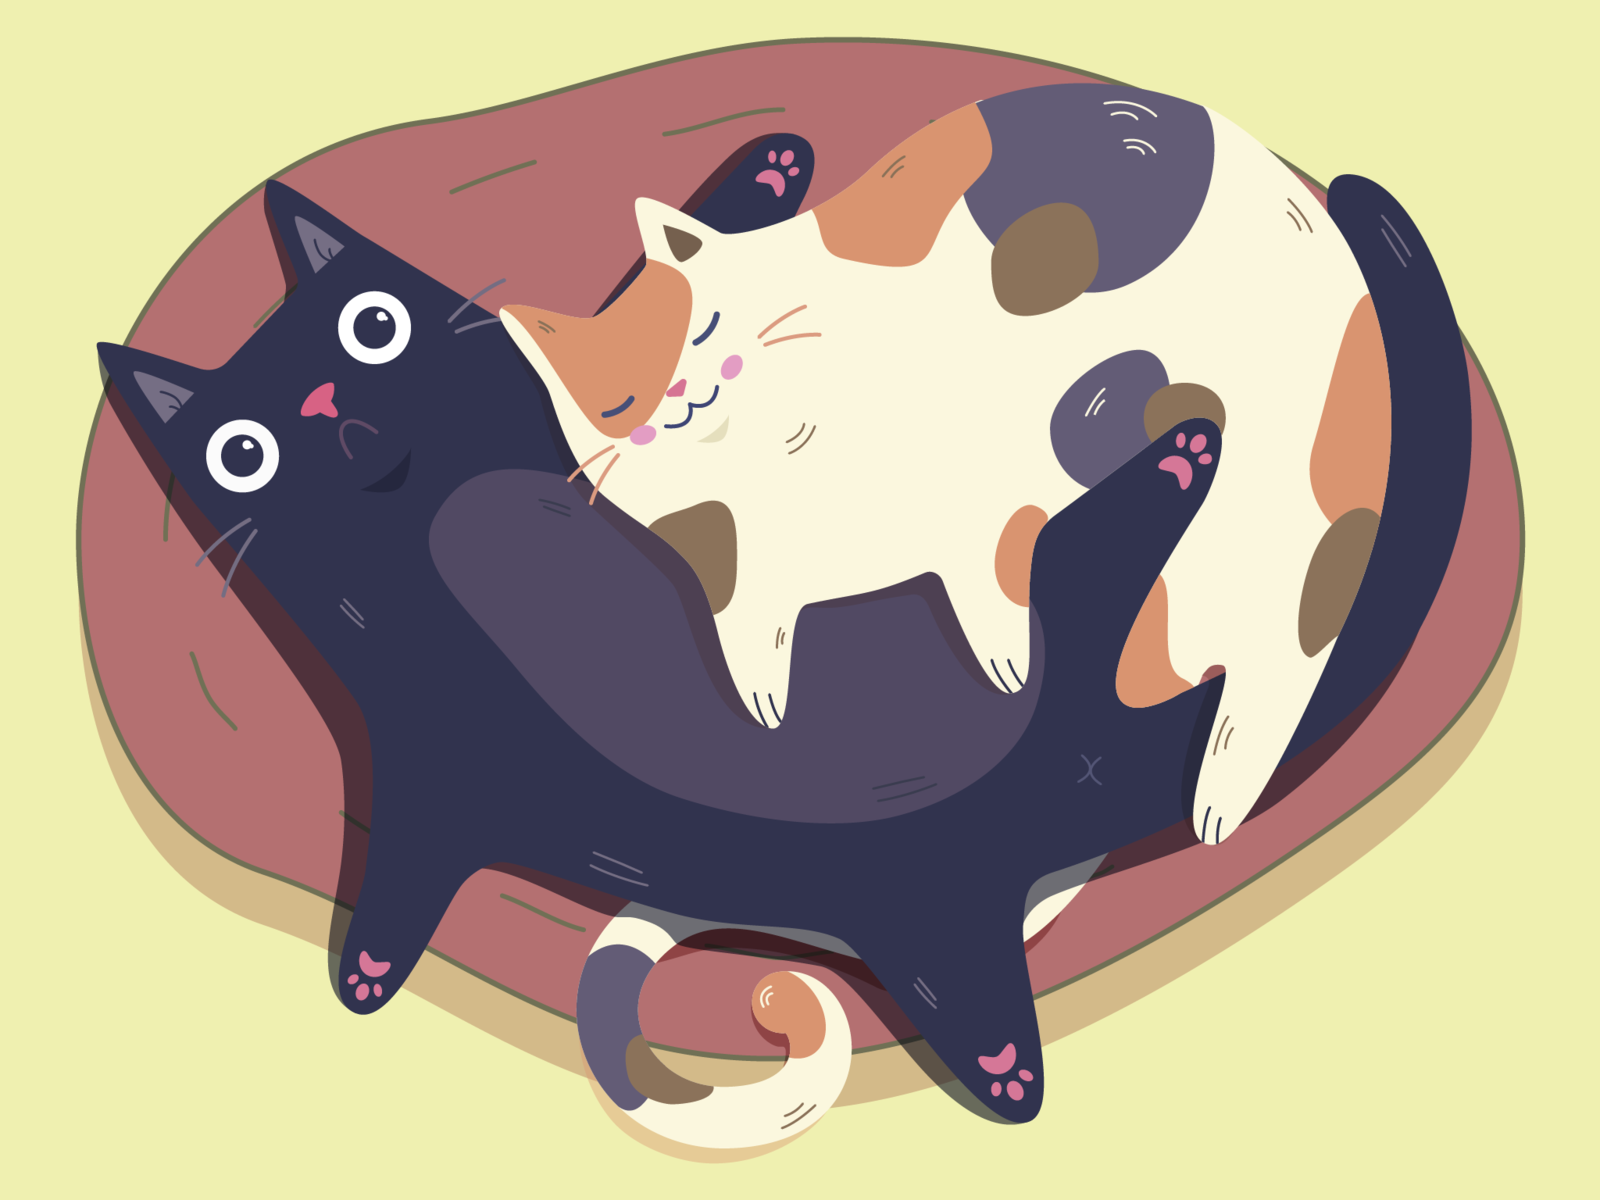 Cats by funO_o on Dribbble